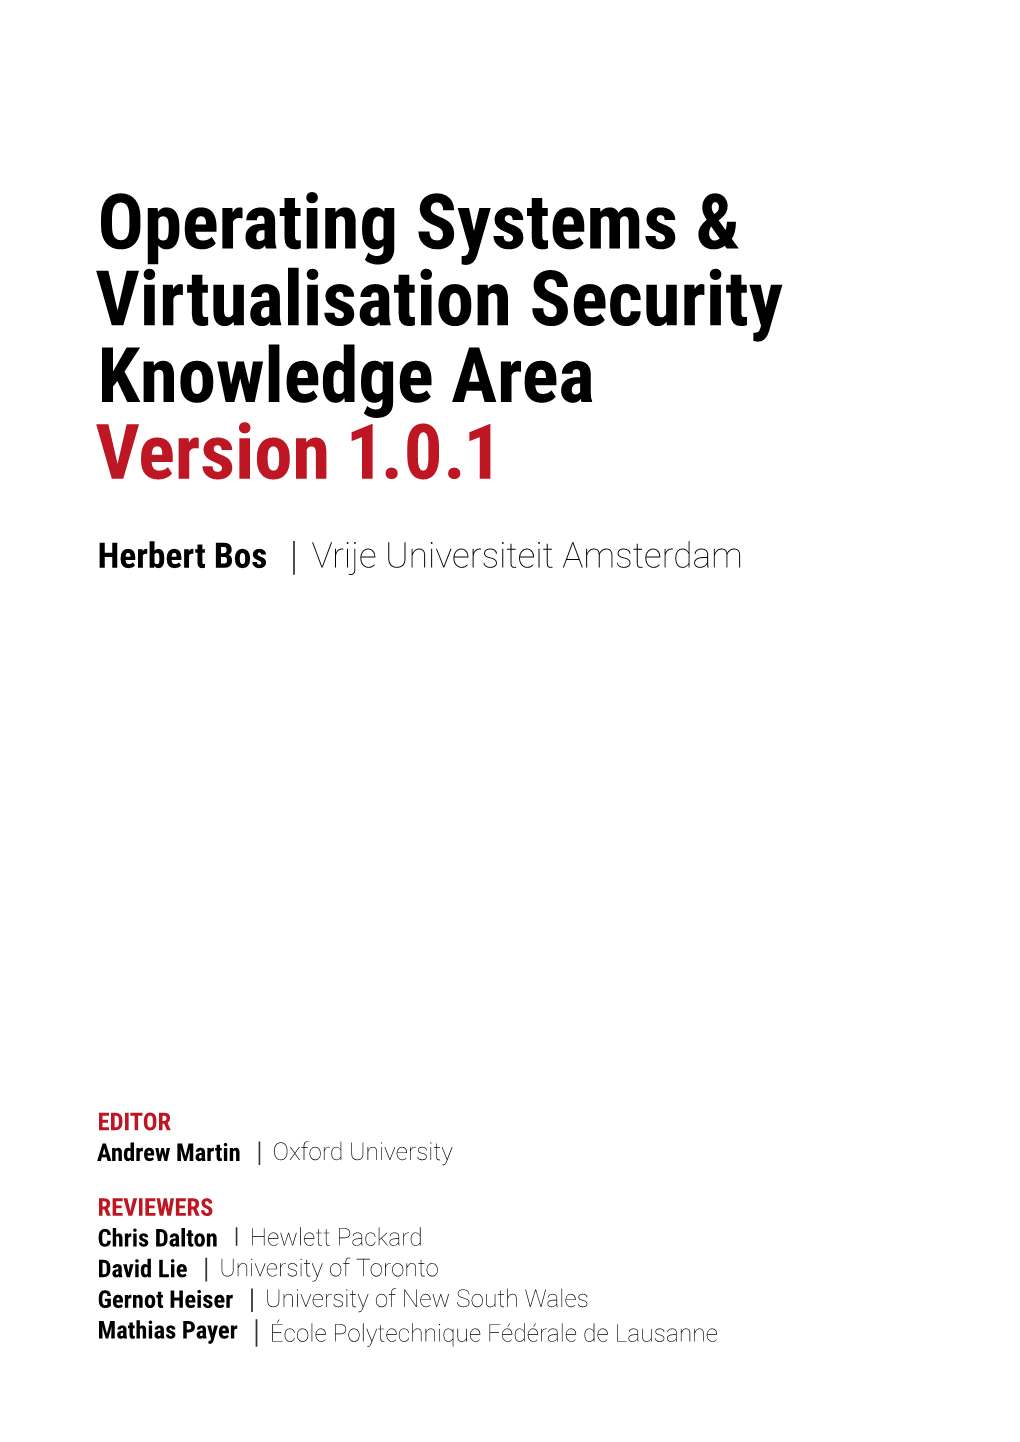 Operating Systems & Virtualisation Security Download Link